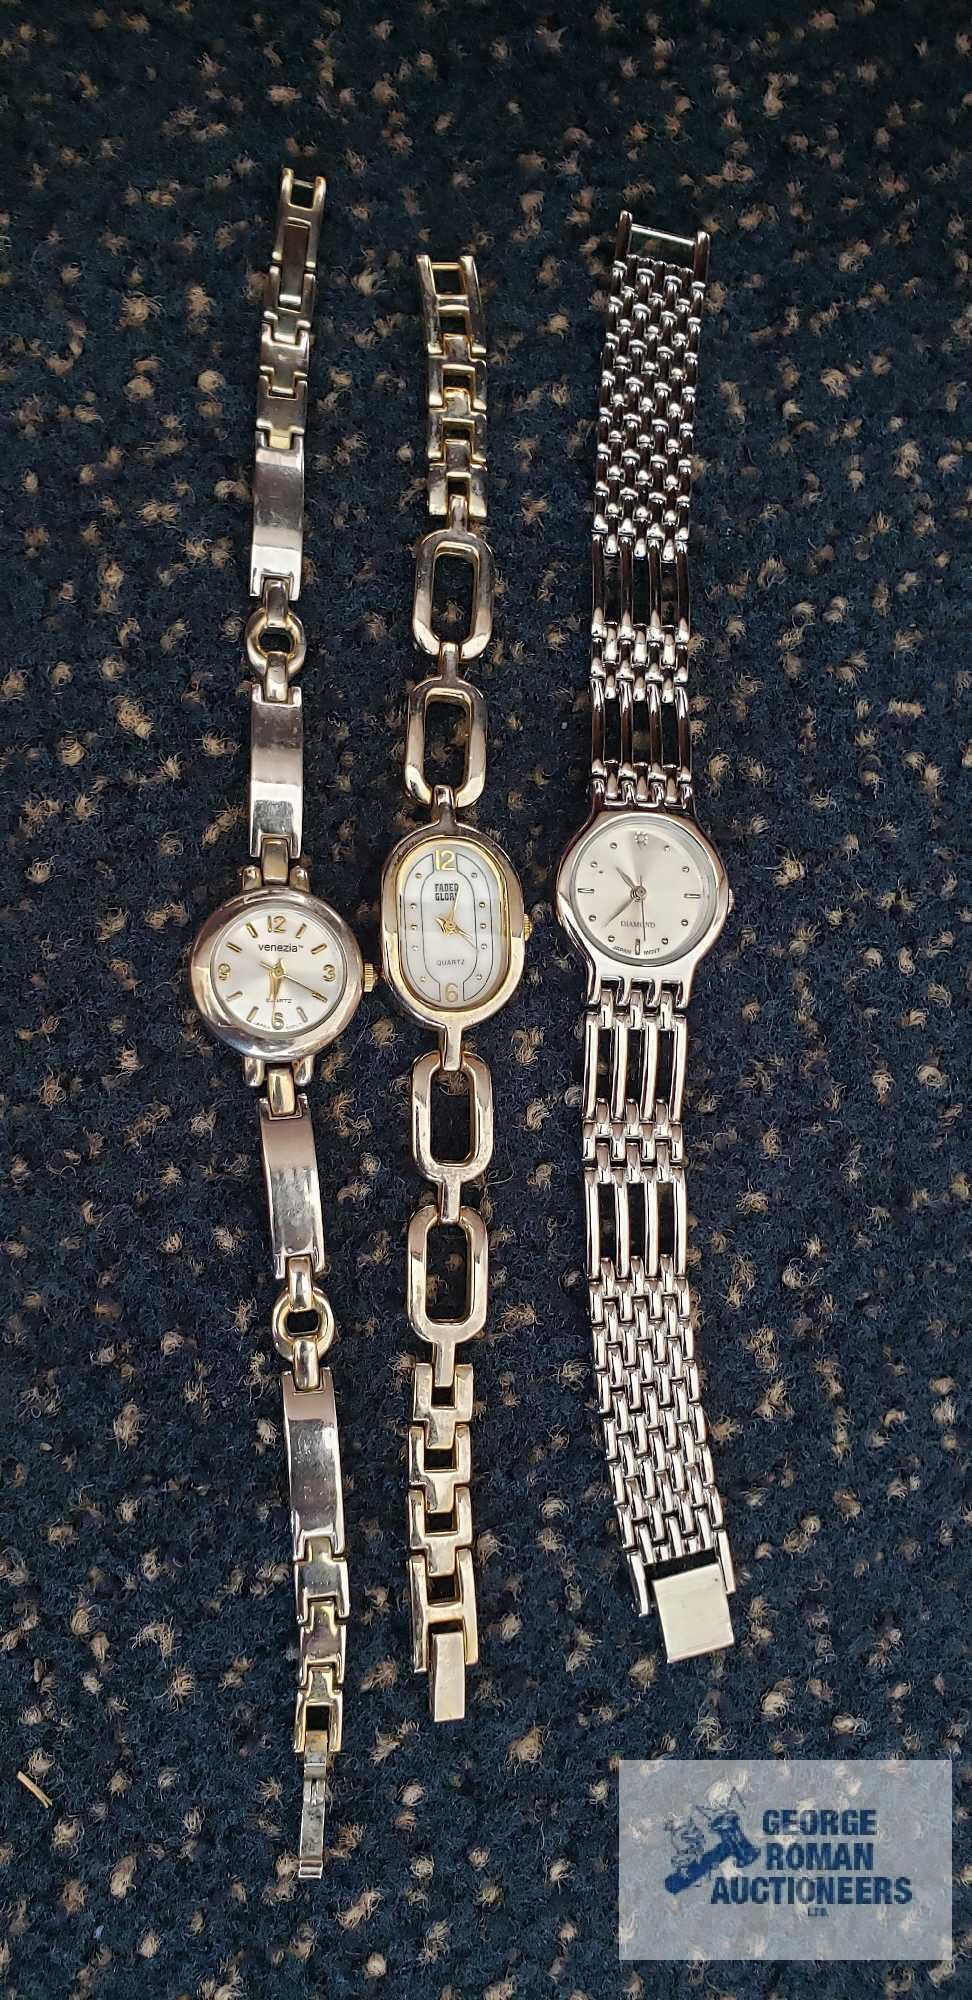 Five watches including Relic, Rumours, Venezia, Faded Glory, and Diamond